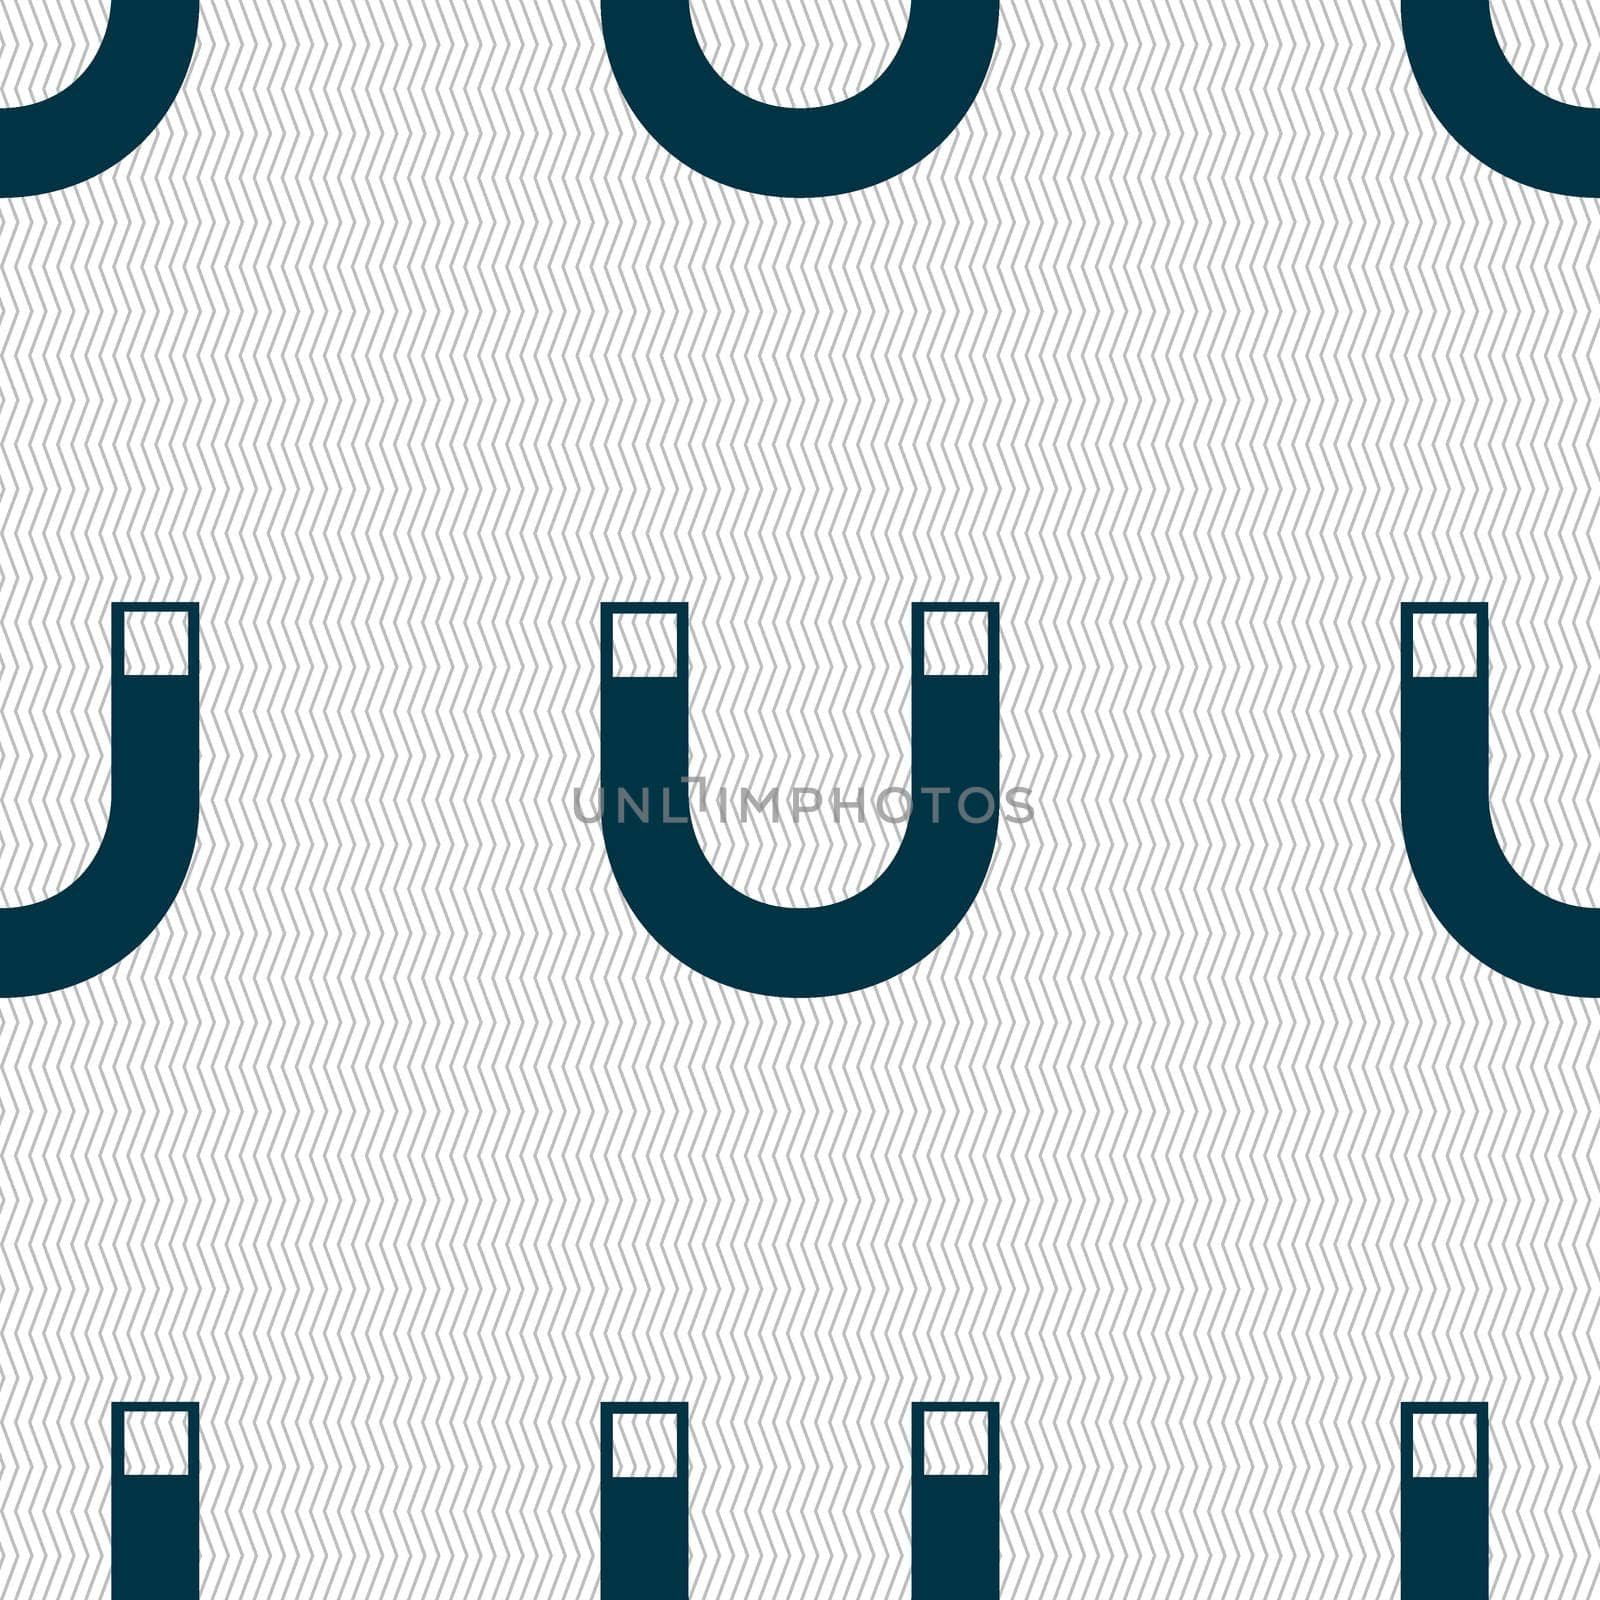 magnet sign icon. horseshoe it symbol. Repair sig. Seamless abstract background with geometric shapes. illustration